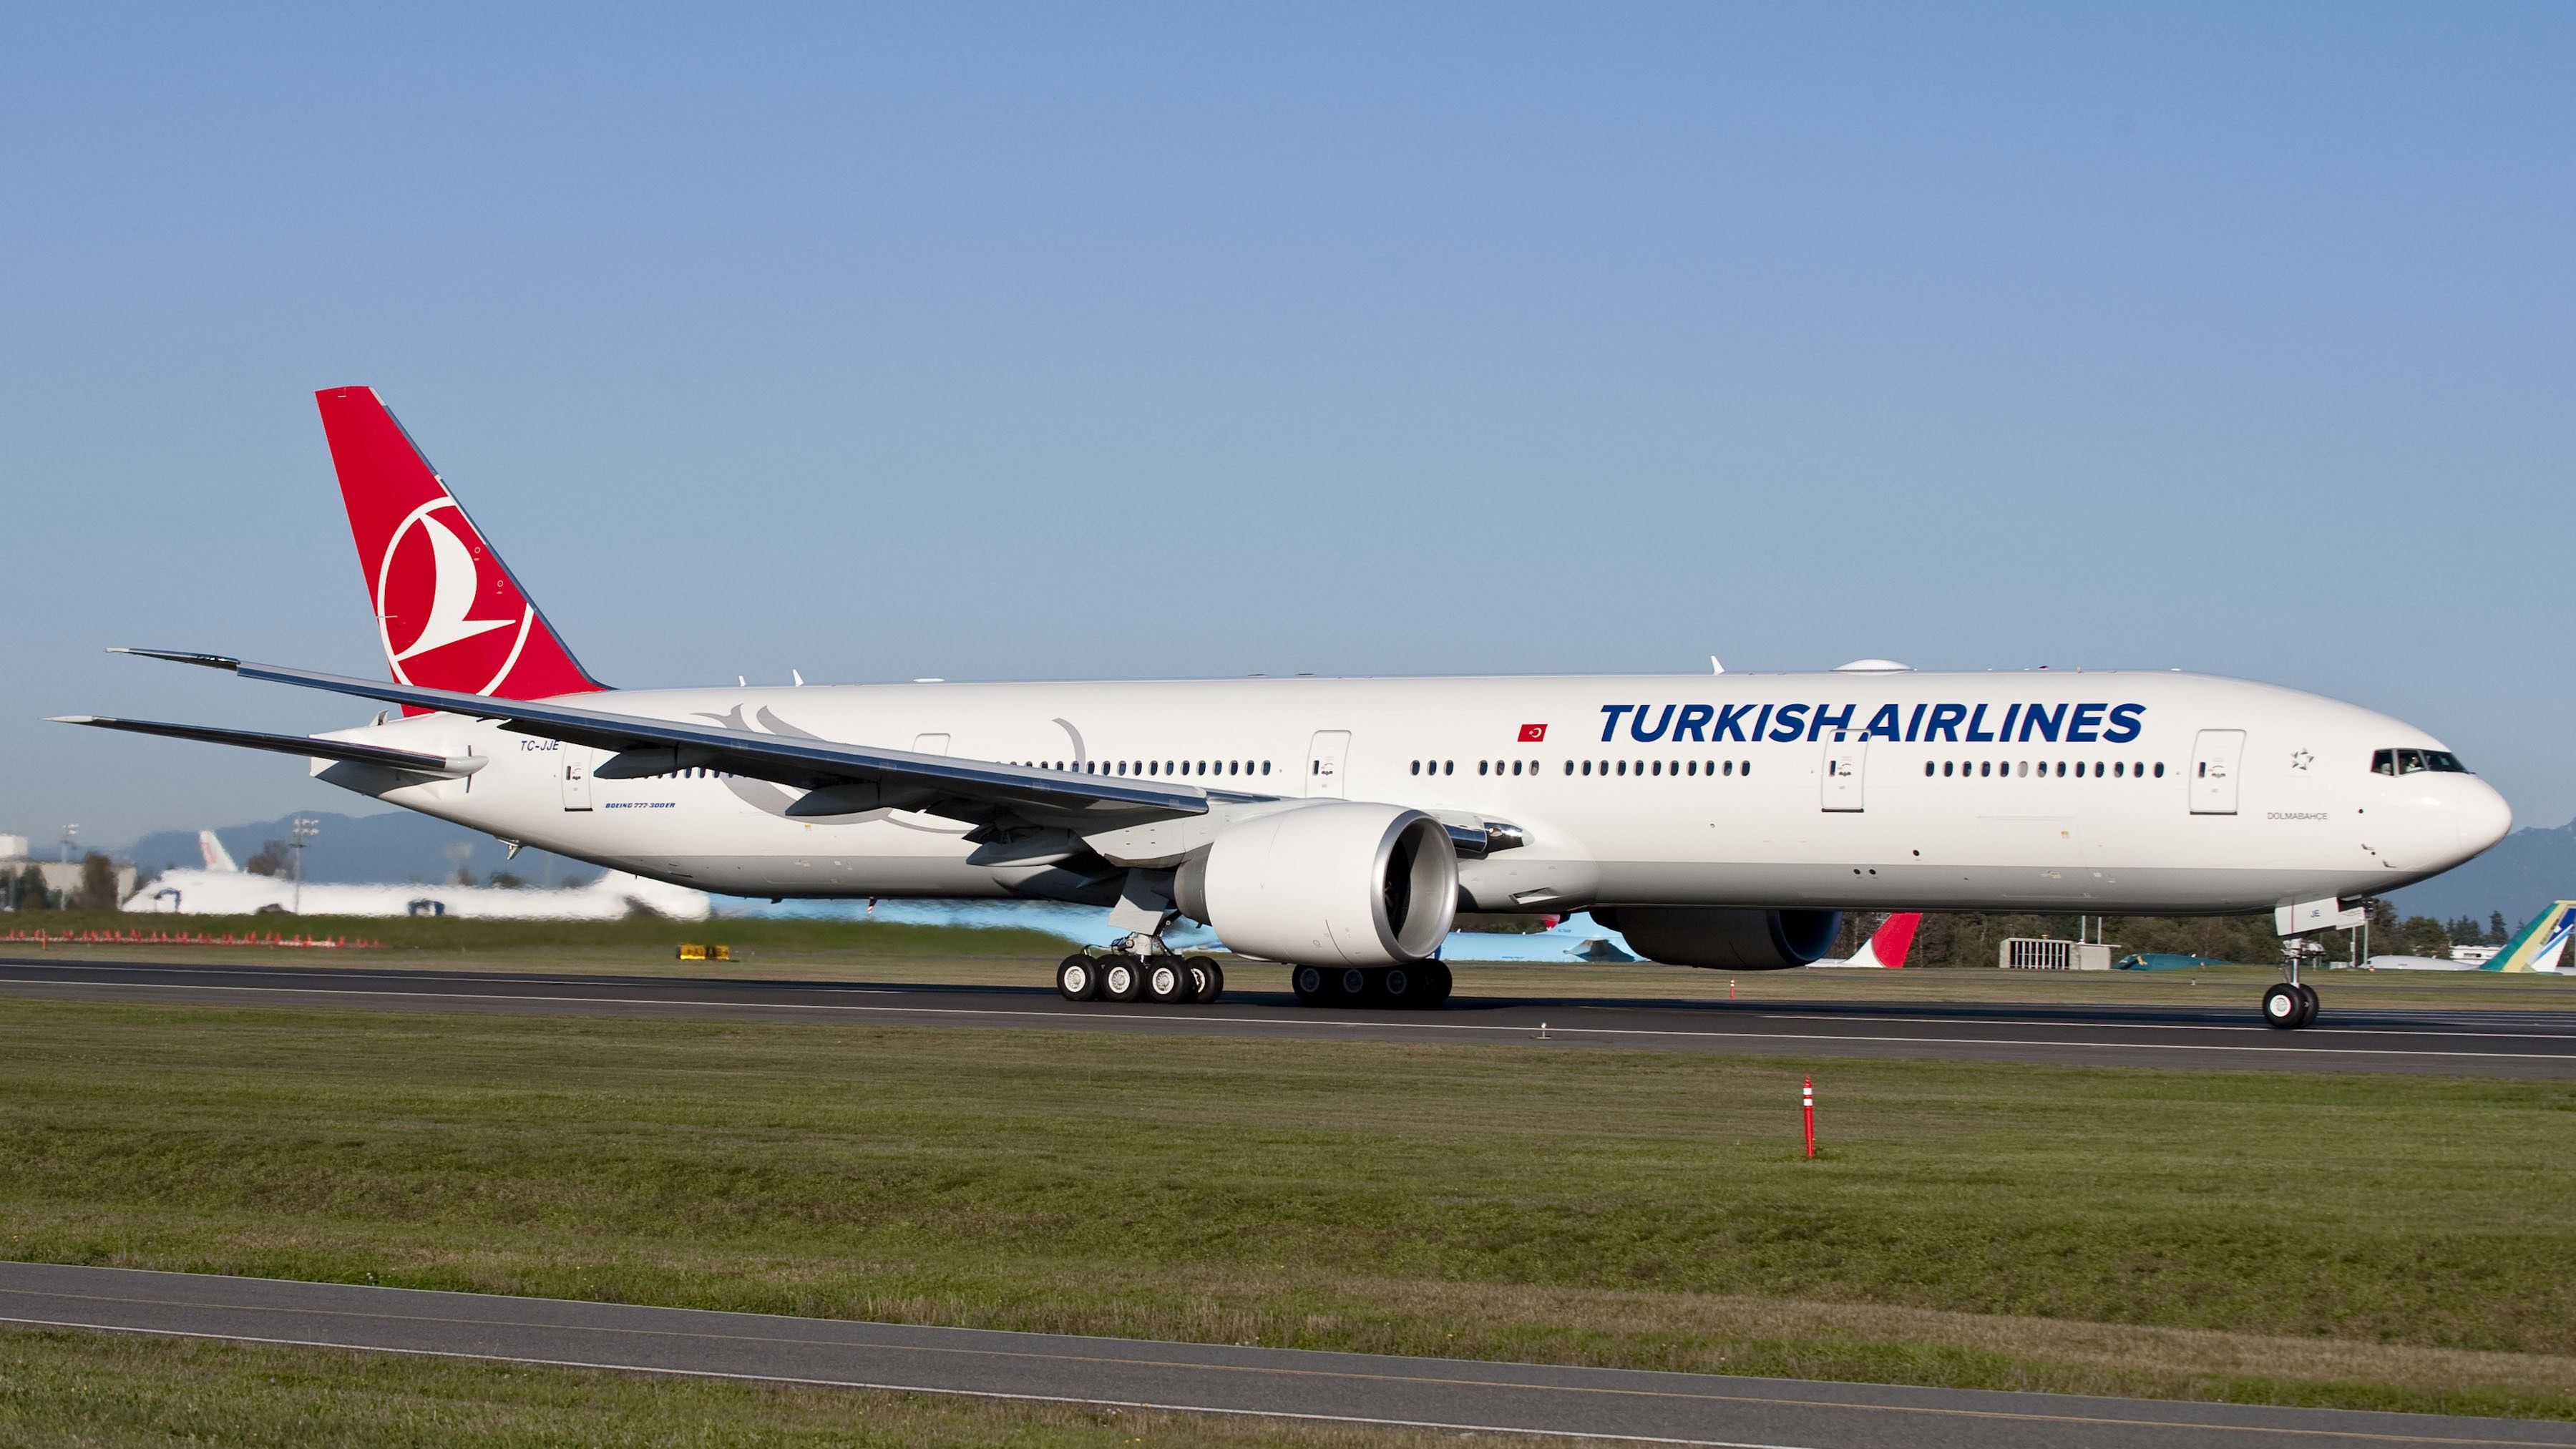 Over 6000 Miles: Turkish Airlines' Istanbul Route Becomes Denver ...